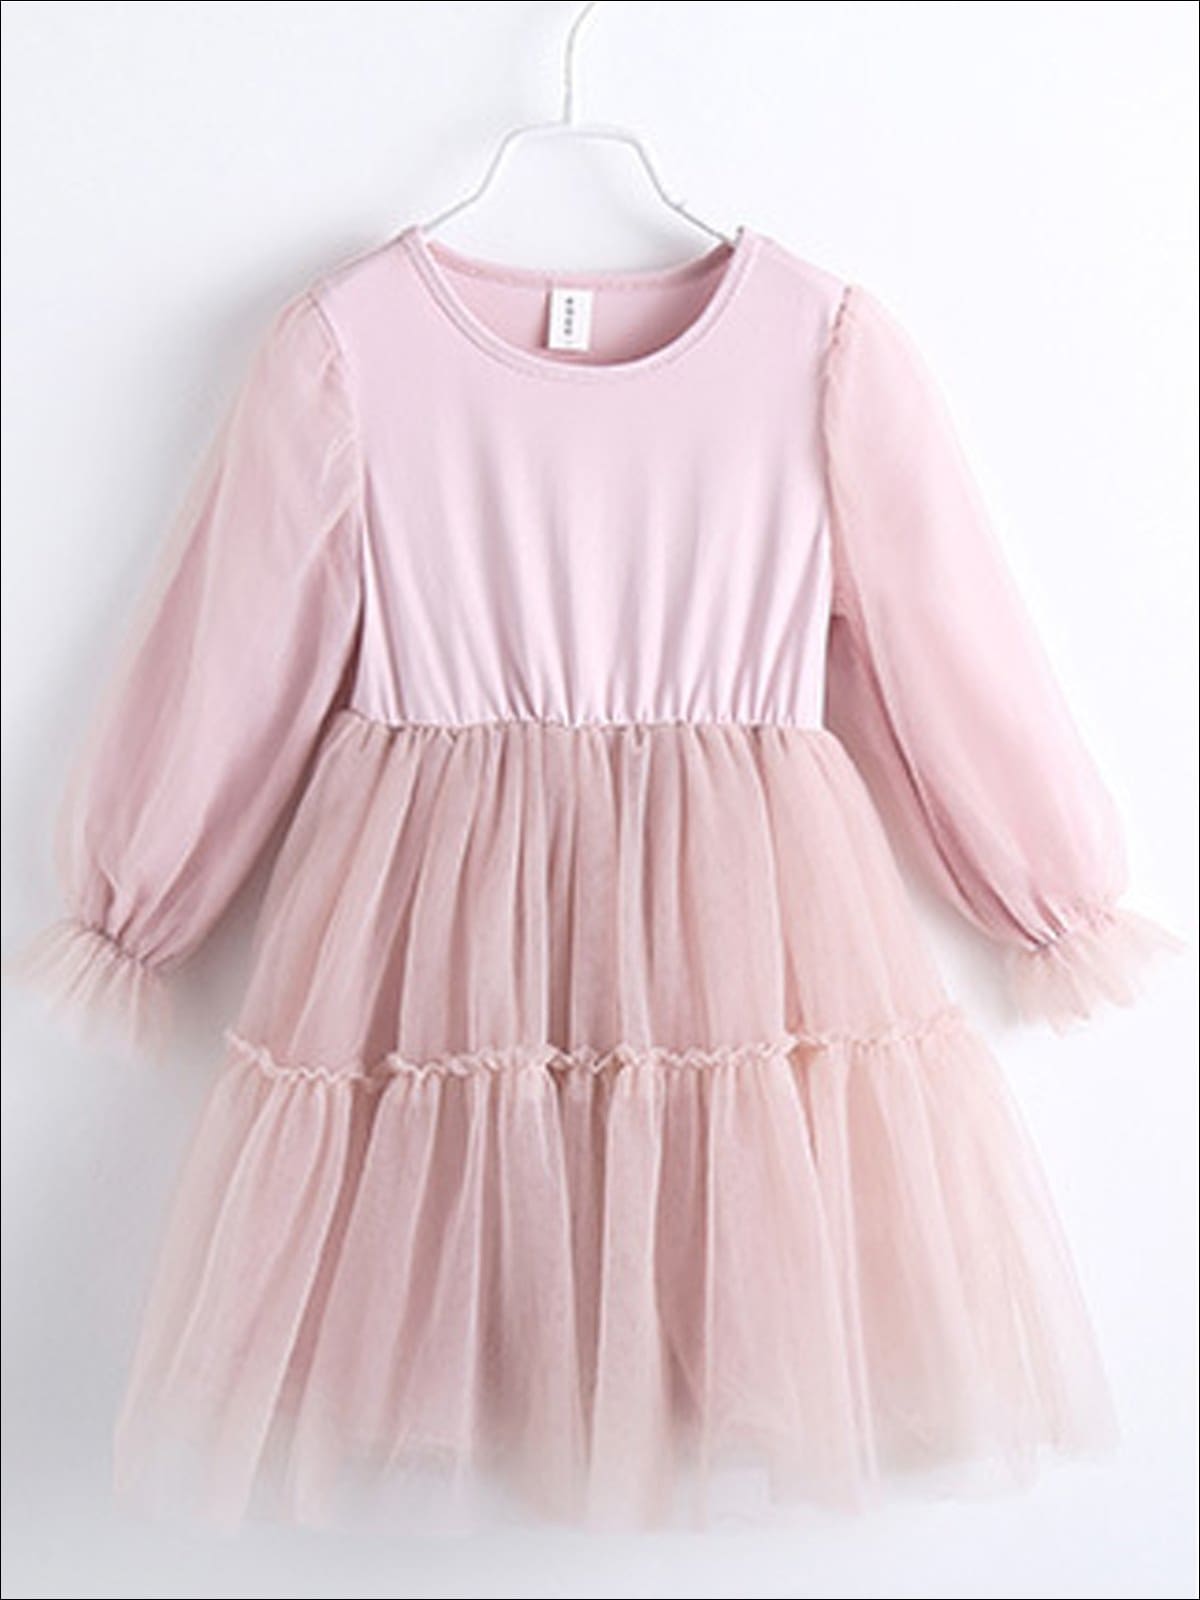 Girls Pink Long Sleeve Tutu Dress with Pearl Embellished & Bow Denim Vest - Girls Fall Casual Dress